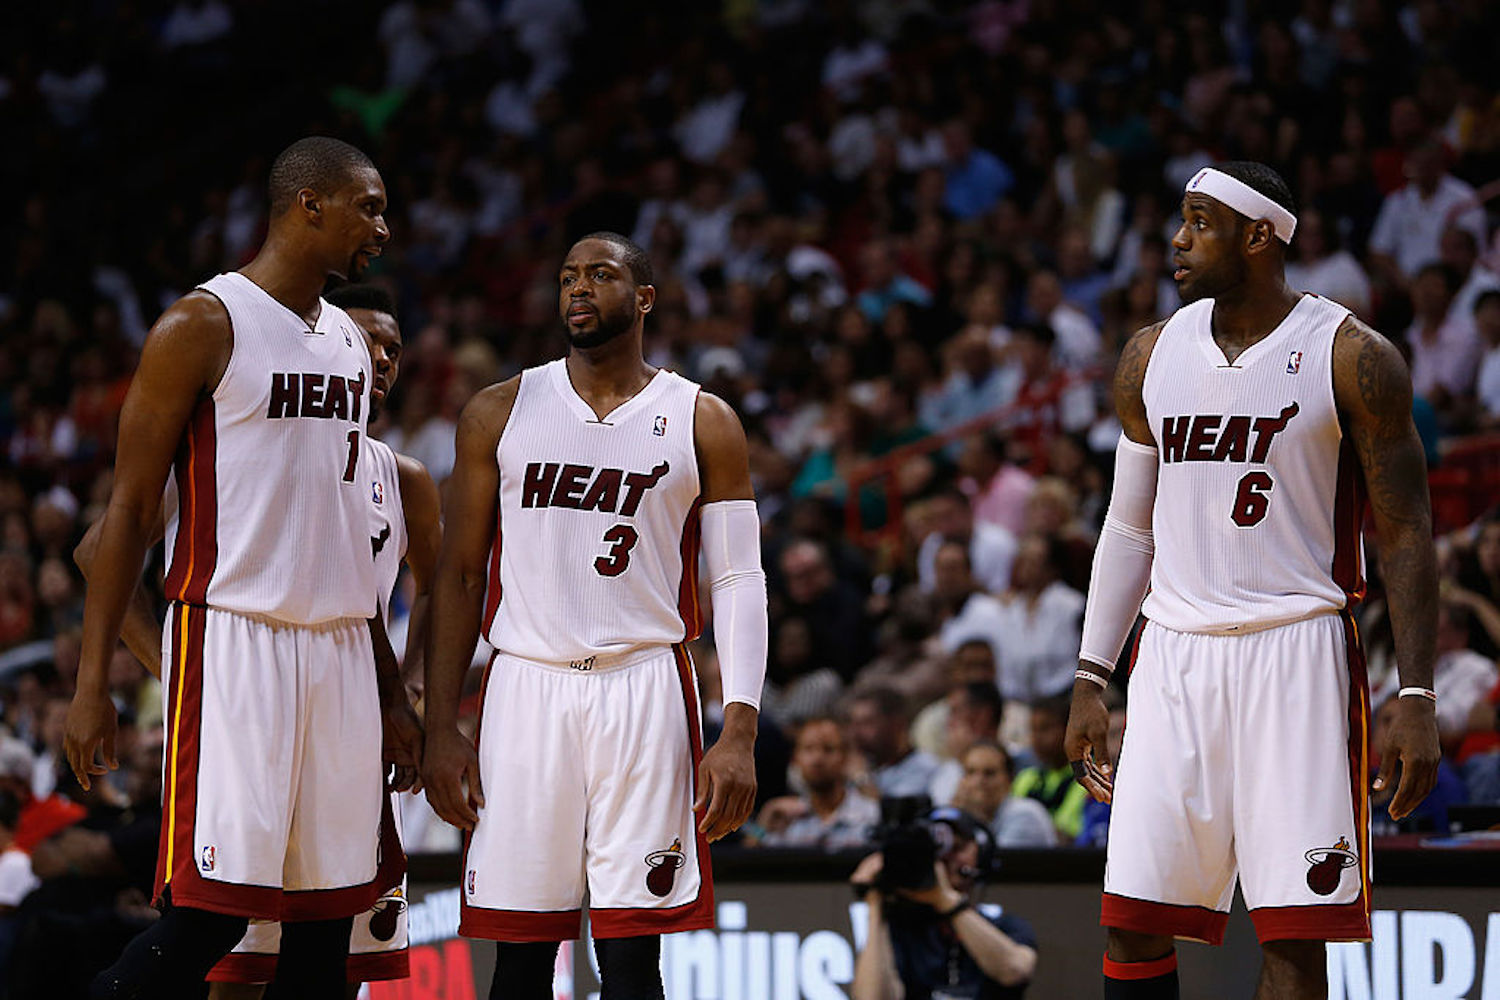 When LeBron James left the Miami Heat in 2014 there was a long list of disappointed NBA fans, and Chris Bosh was one of them.